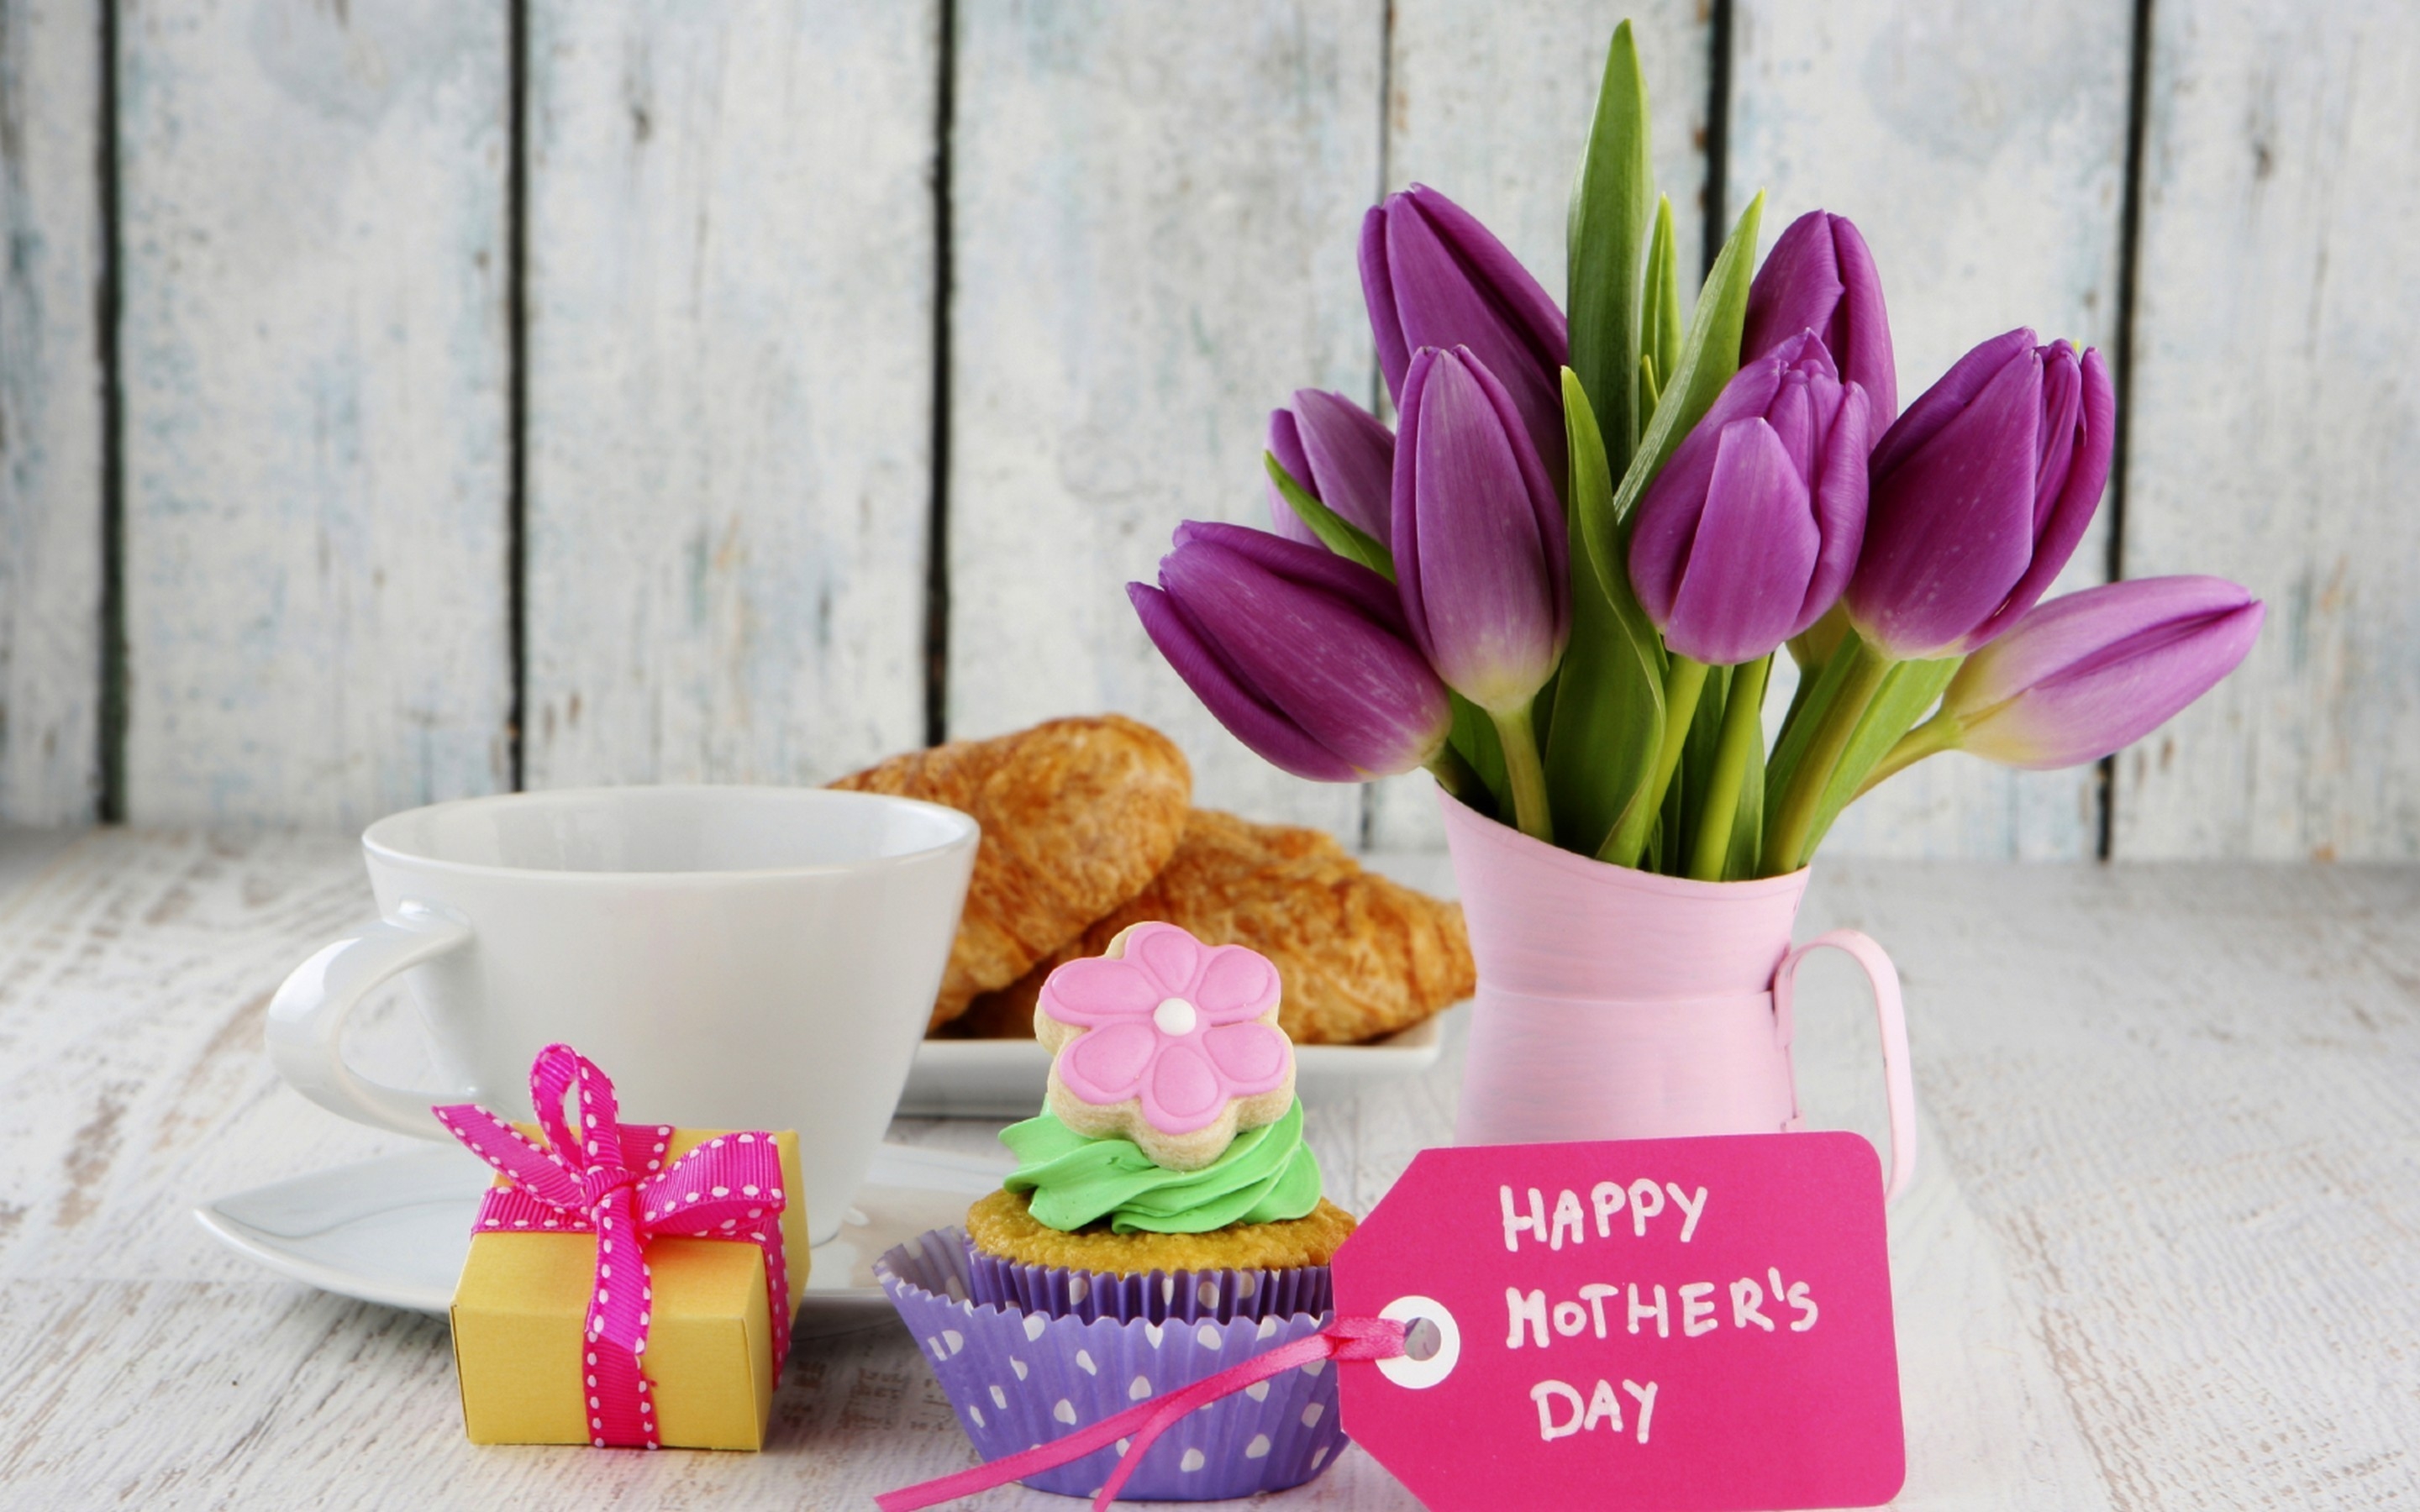 Mothers Day Gifts for 2880 x 1800 Retina Display resolution